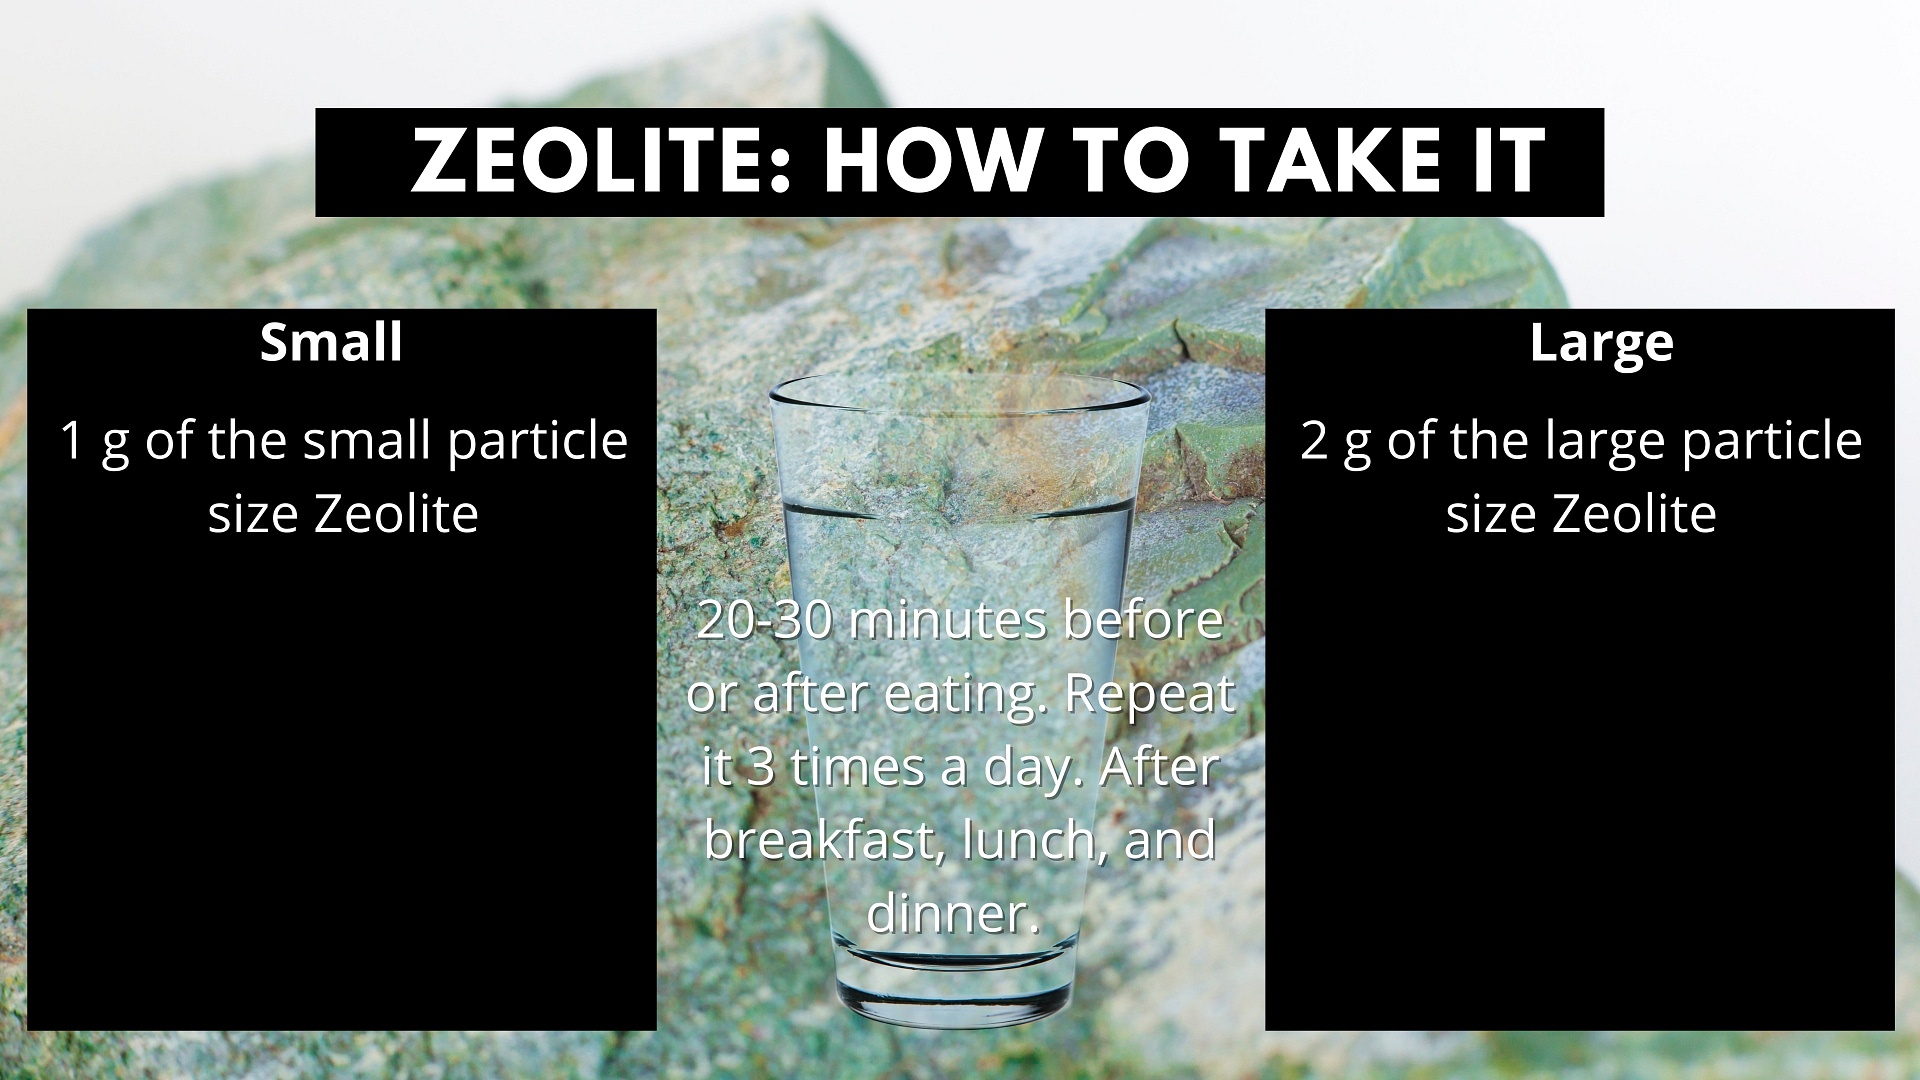 How to take zeolite for a heavy metal detox?